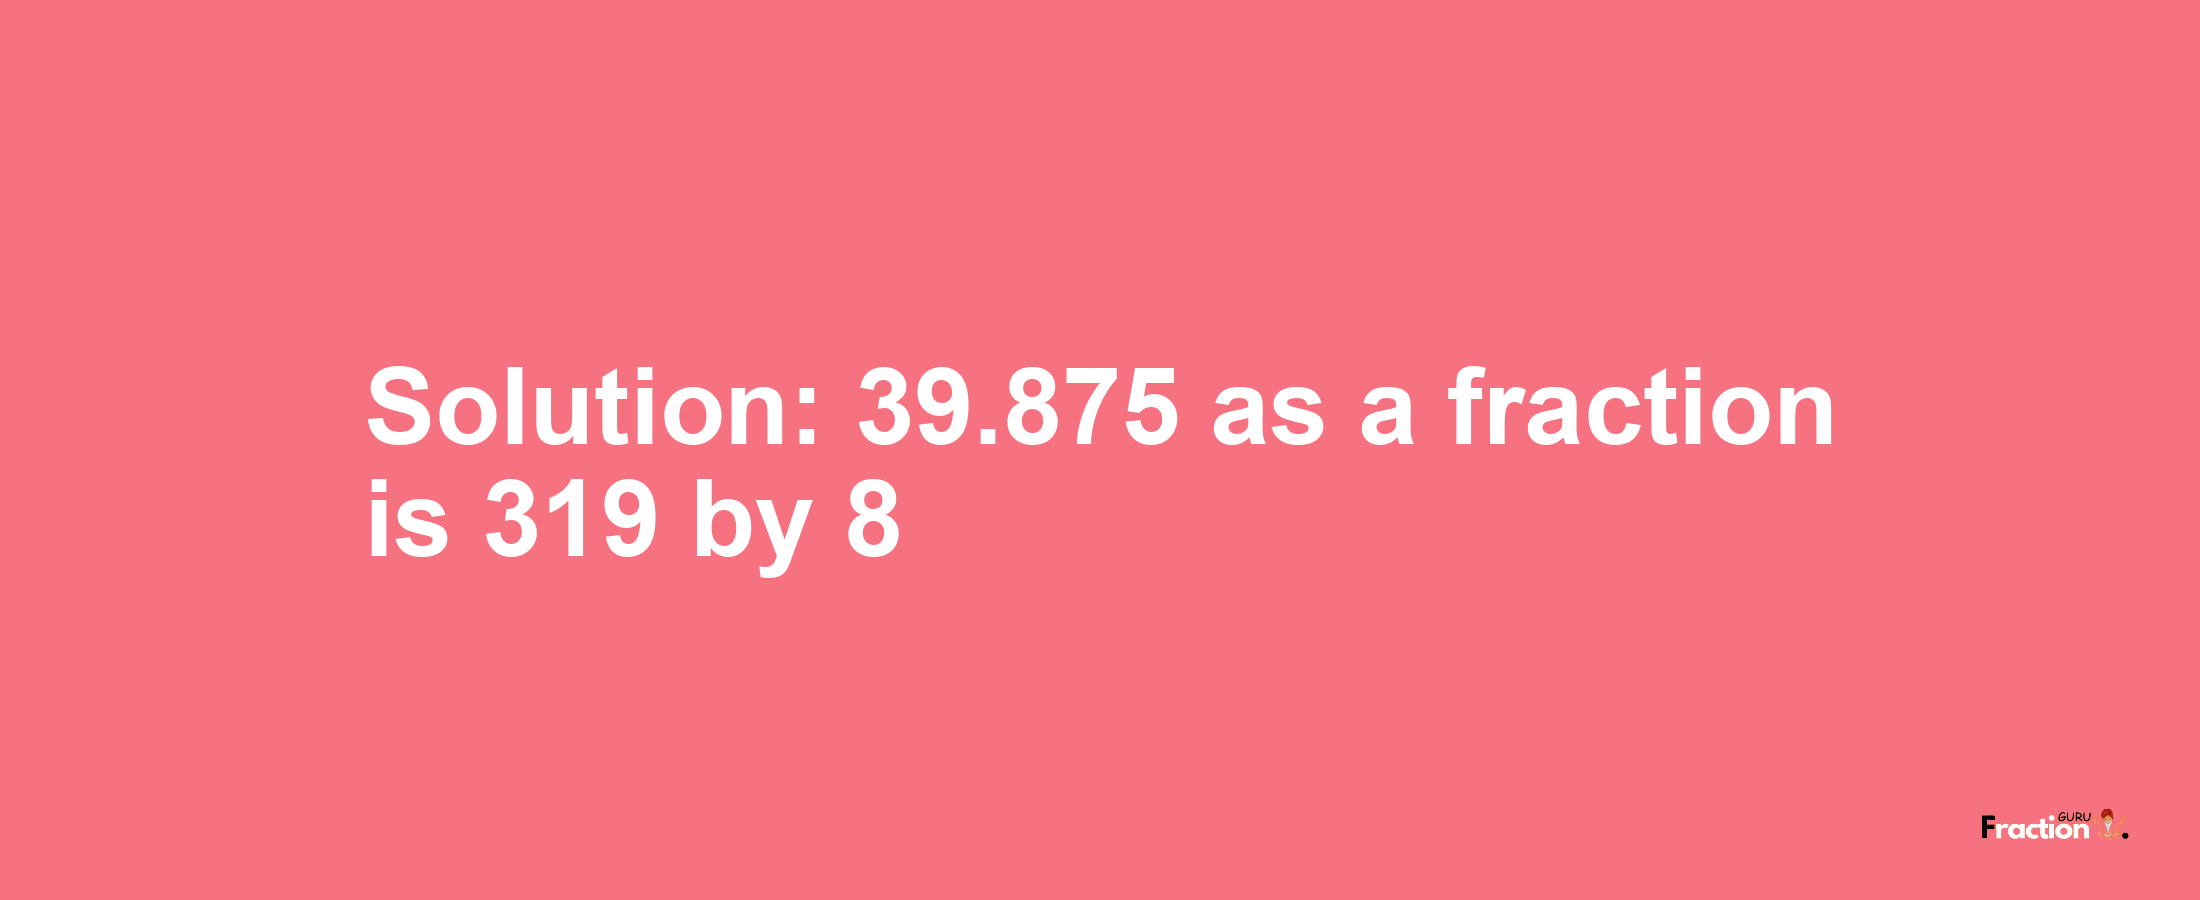 Solution:39.875 as a fraction is 319/8